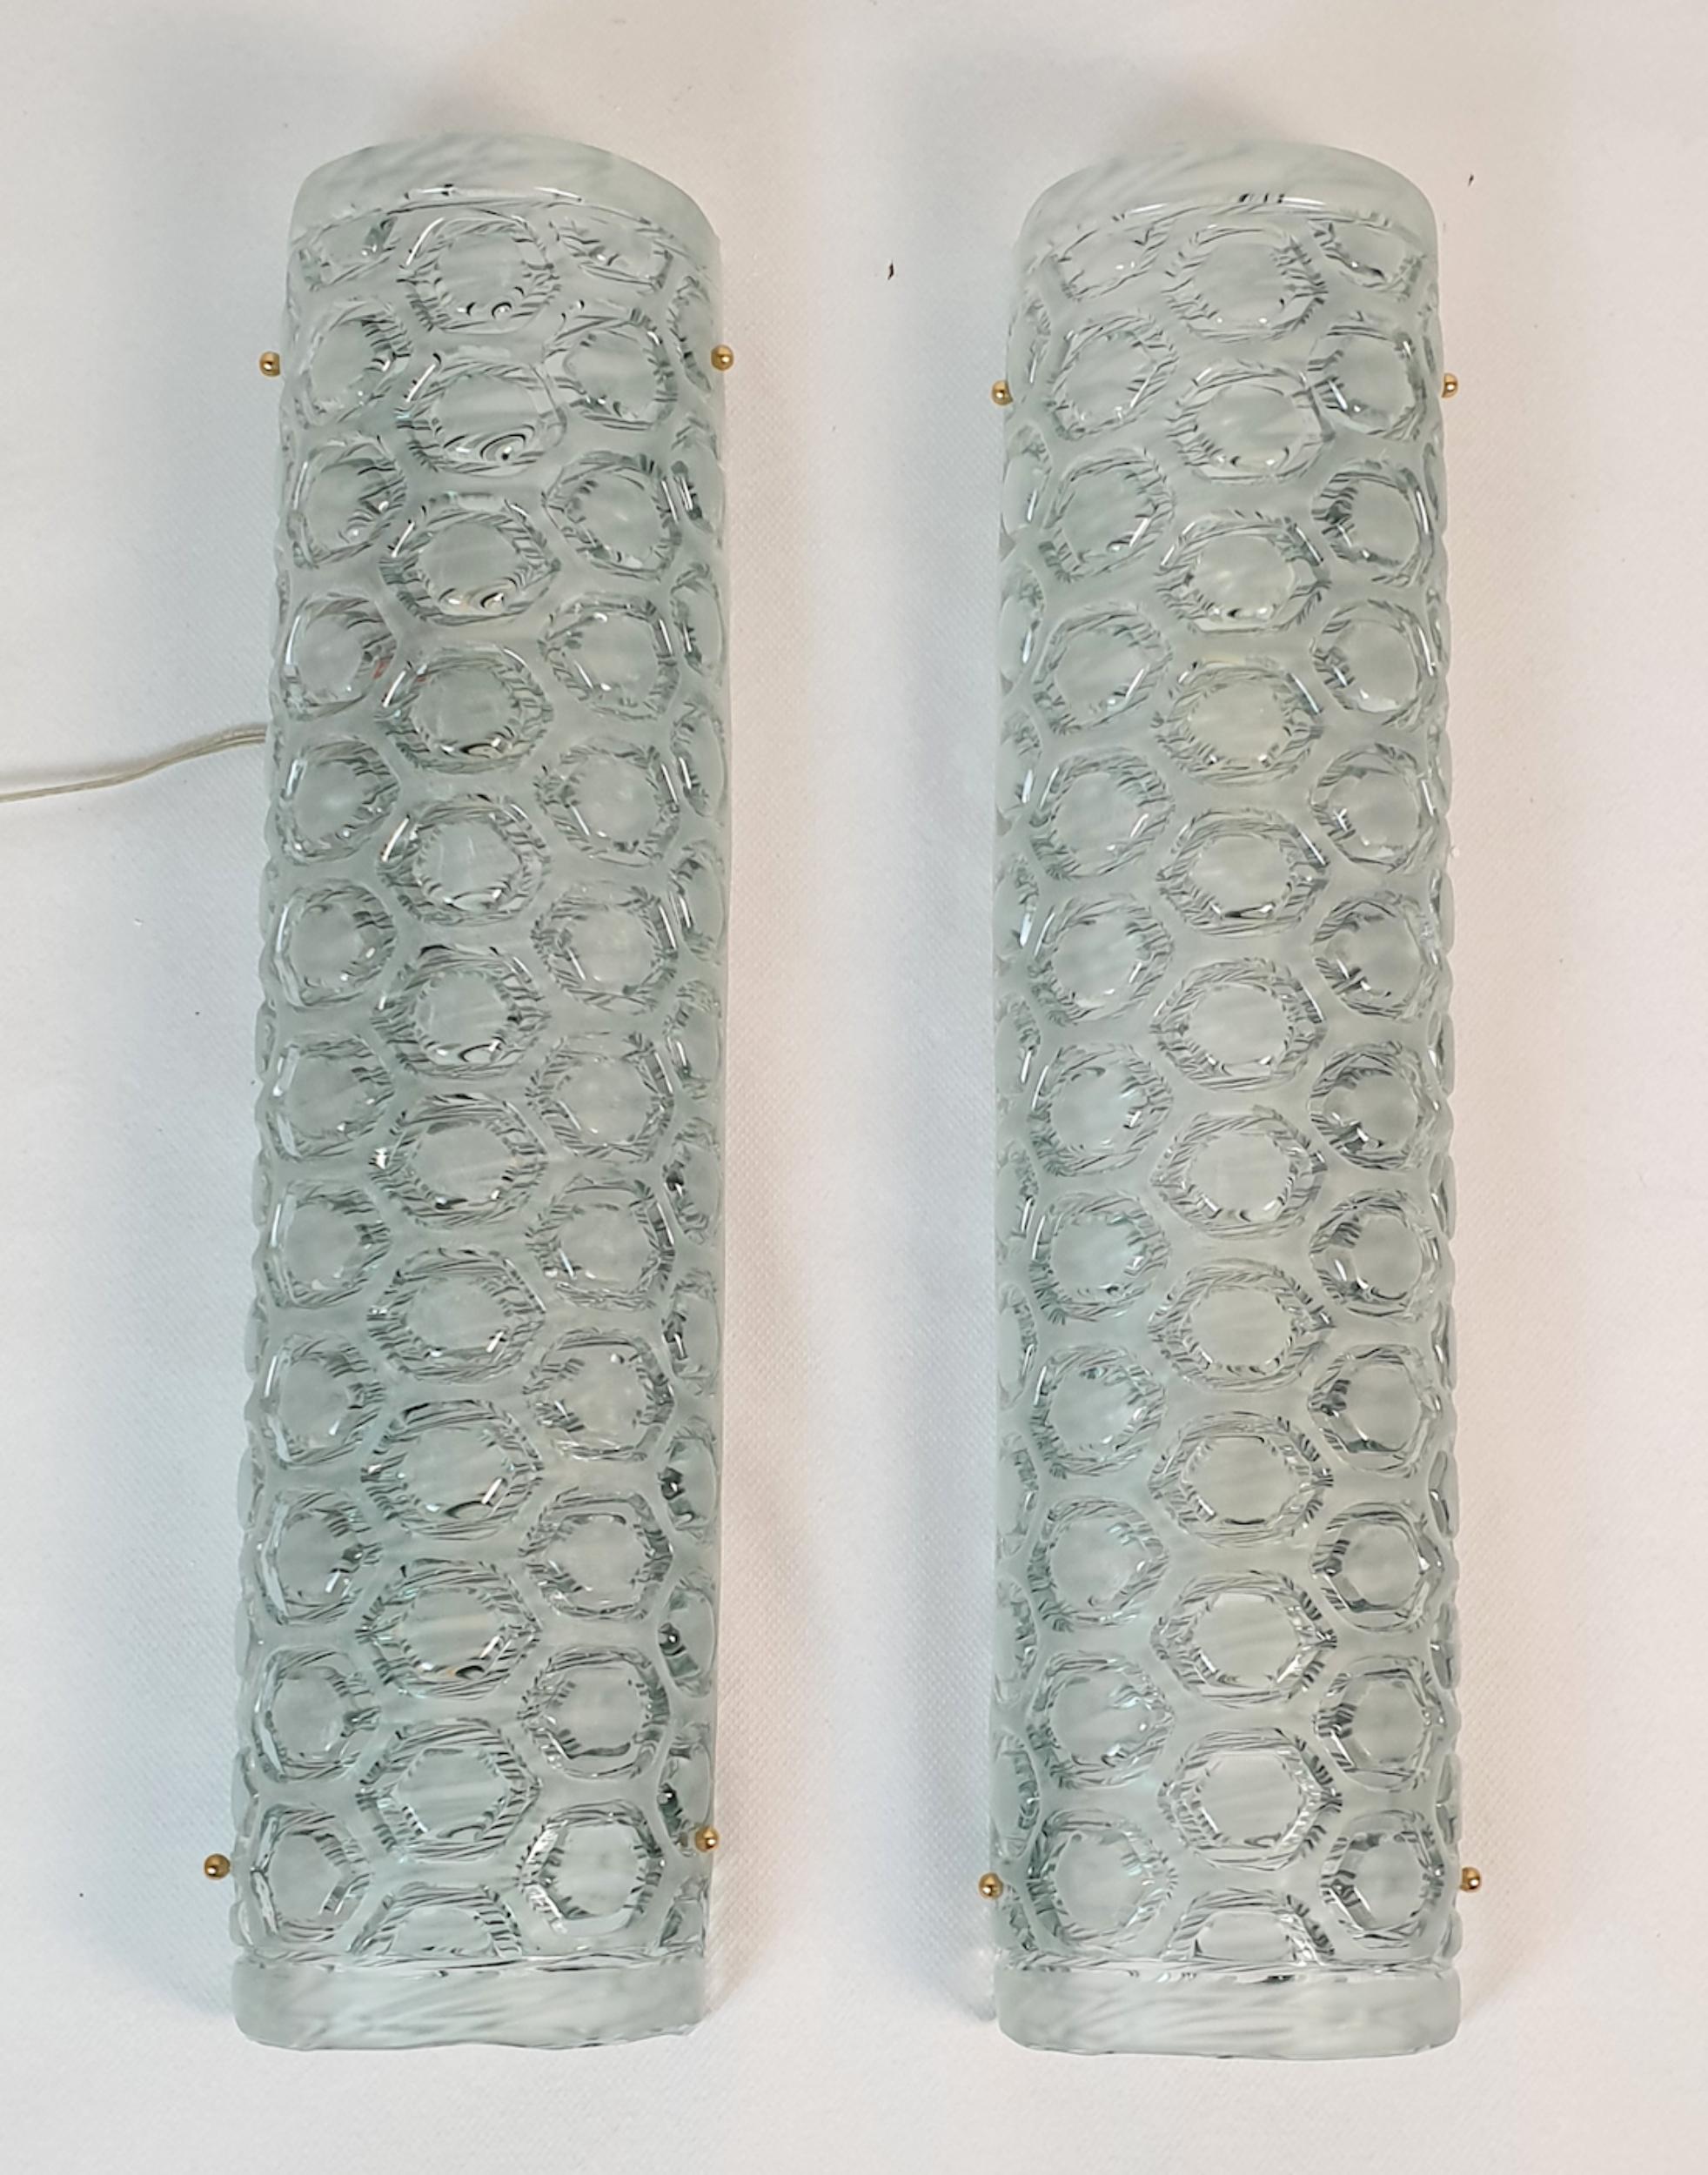 Pair of tall Mid Century Modern Murano glass wall sconces, attributed to Mazzega, Italy 1980s.
The vintage sconces are made of a light green frosted Murano glass.
There is a nice medallion pattern showing the thickness of the glass, which is frosted